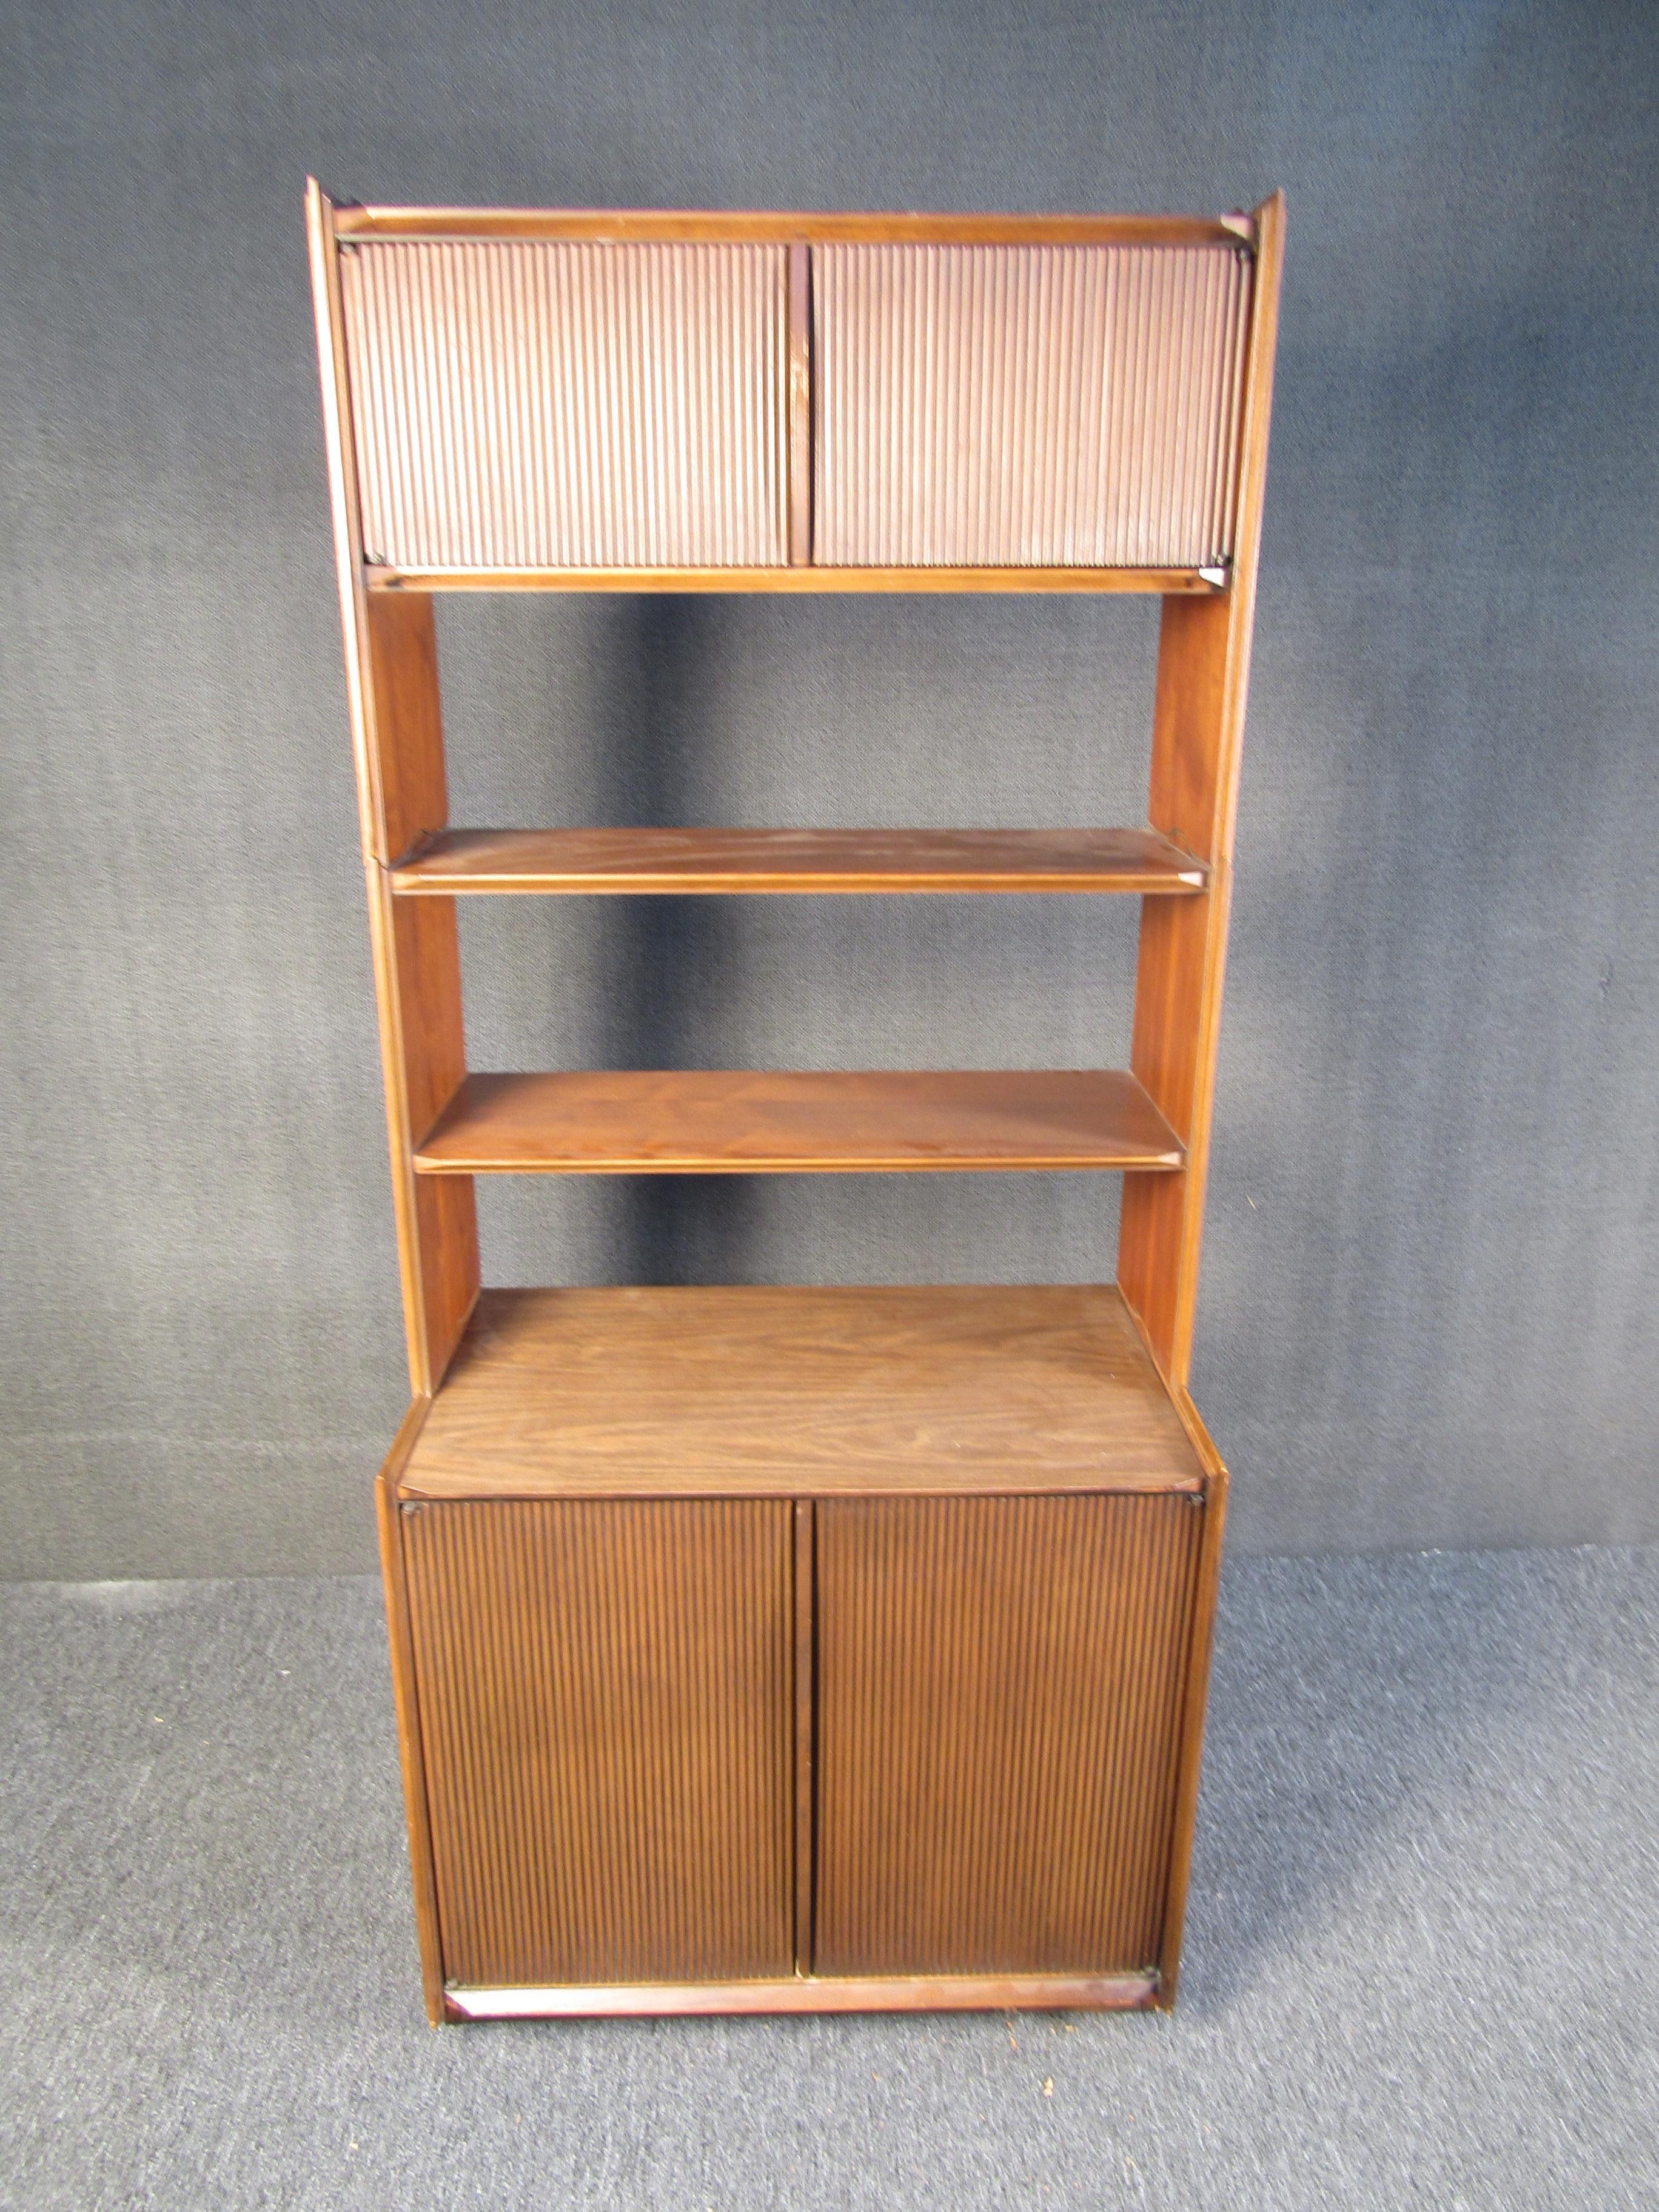 Unusual Mid-Century Modern bookshelf. Three separate components which stack on each other. Ample storage space. Nice walnut finish. Please confirm item location with dealer (NJ or NY).